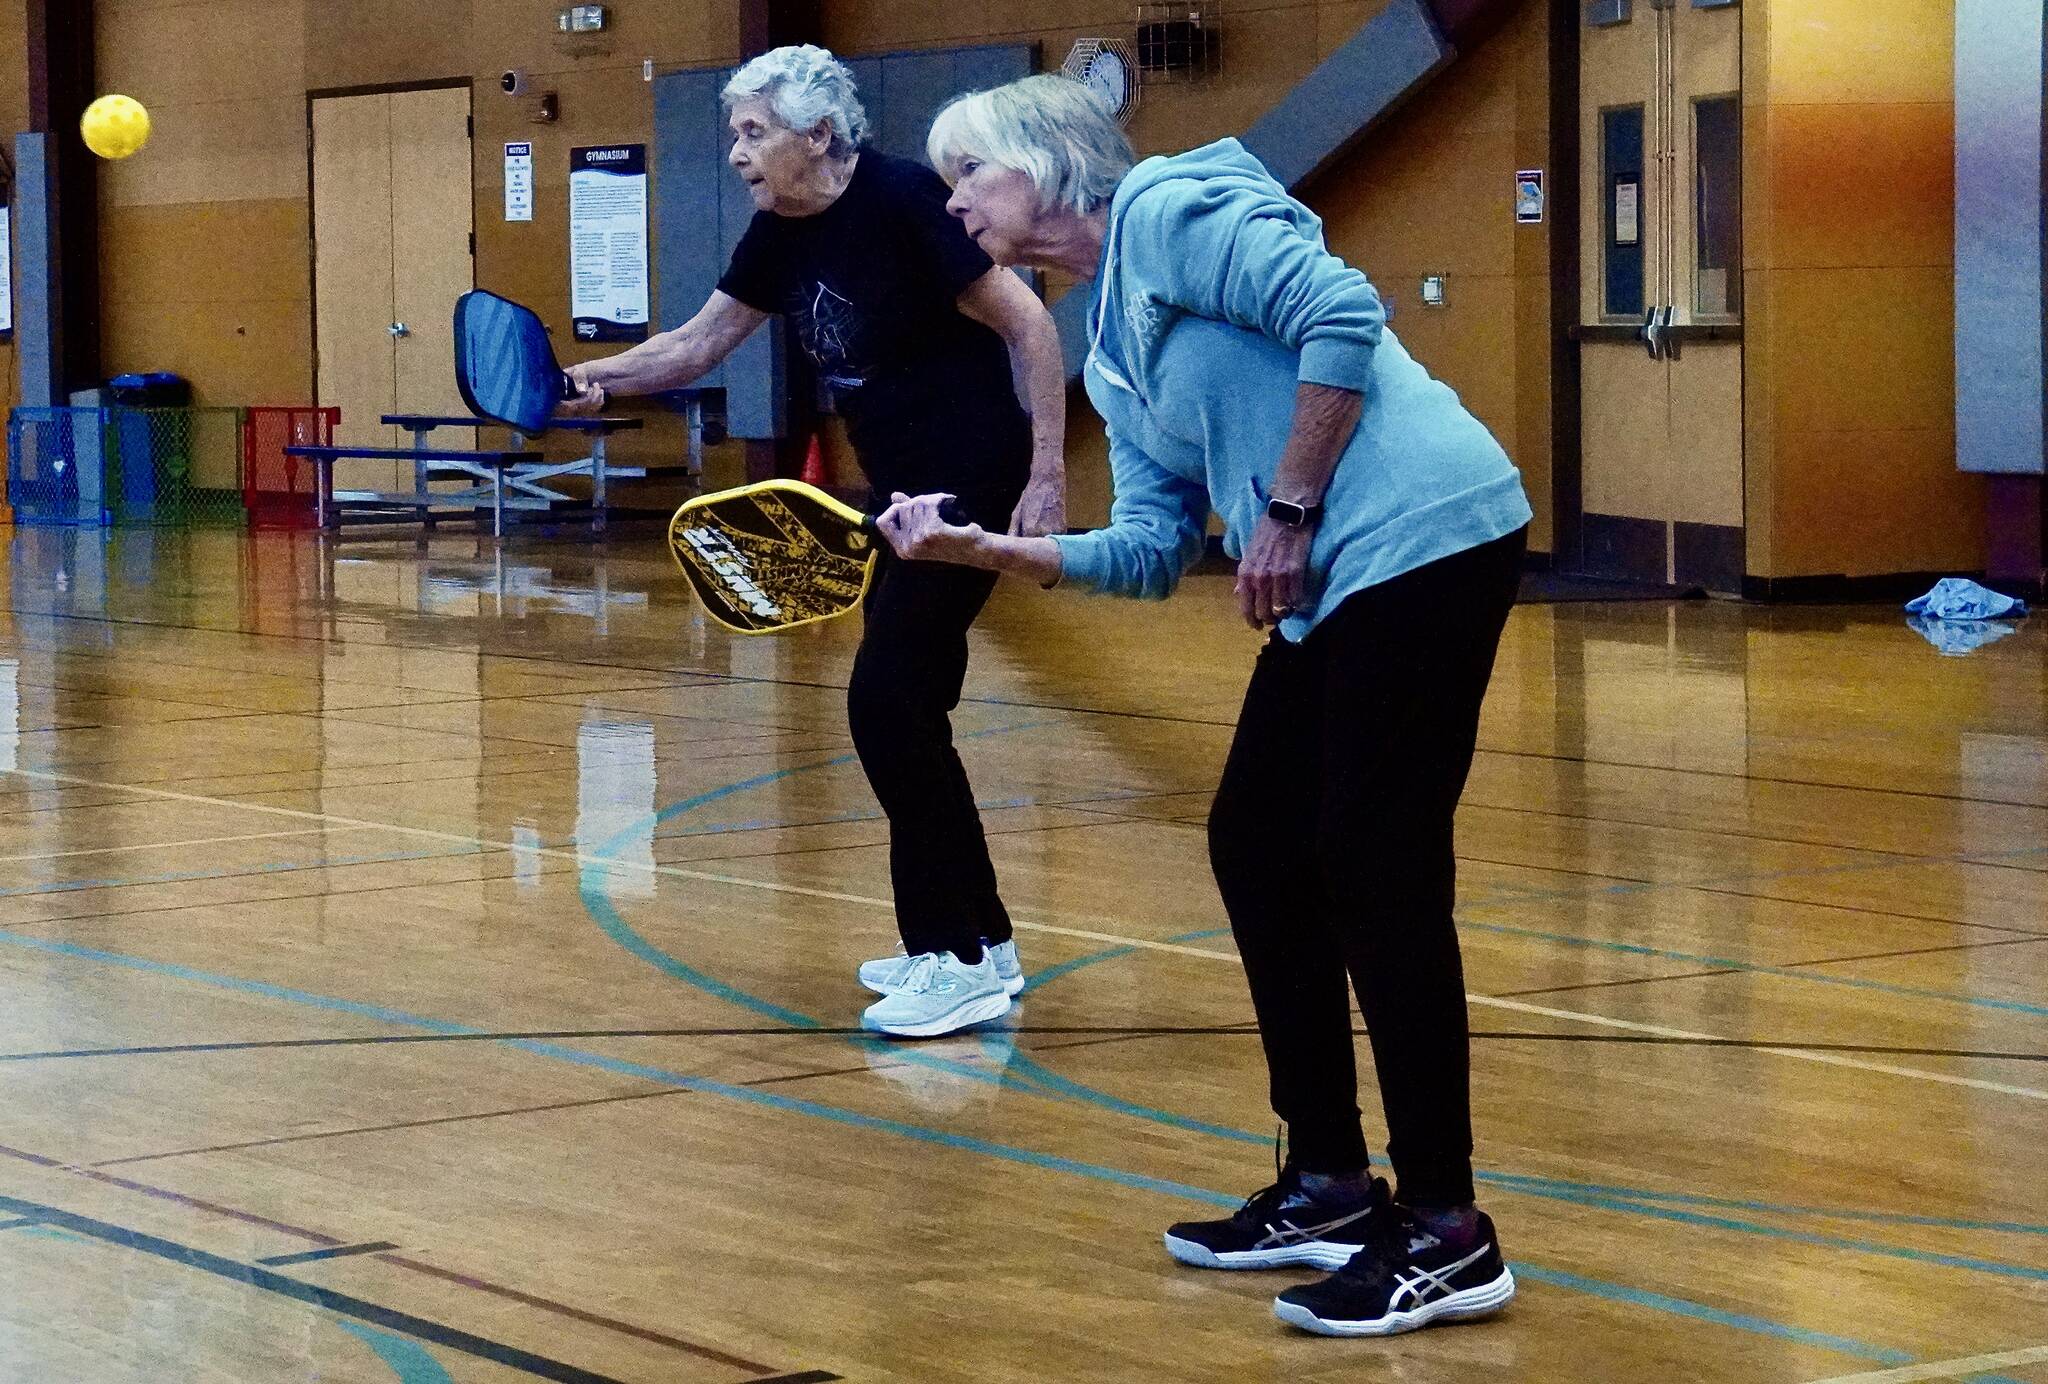 Annette Petrovich and Linda Whipple play pickleball at the Federal Way Community Center. Photo by Joshua Solorzano/The Mirror